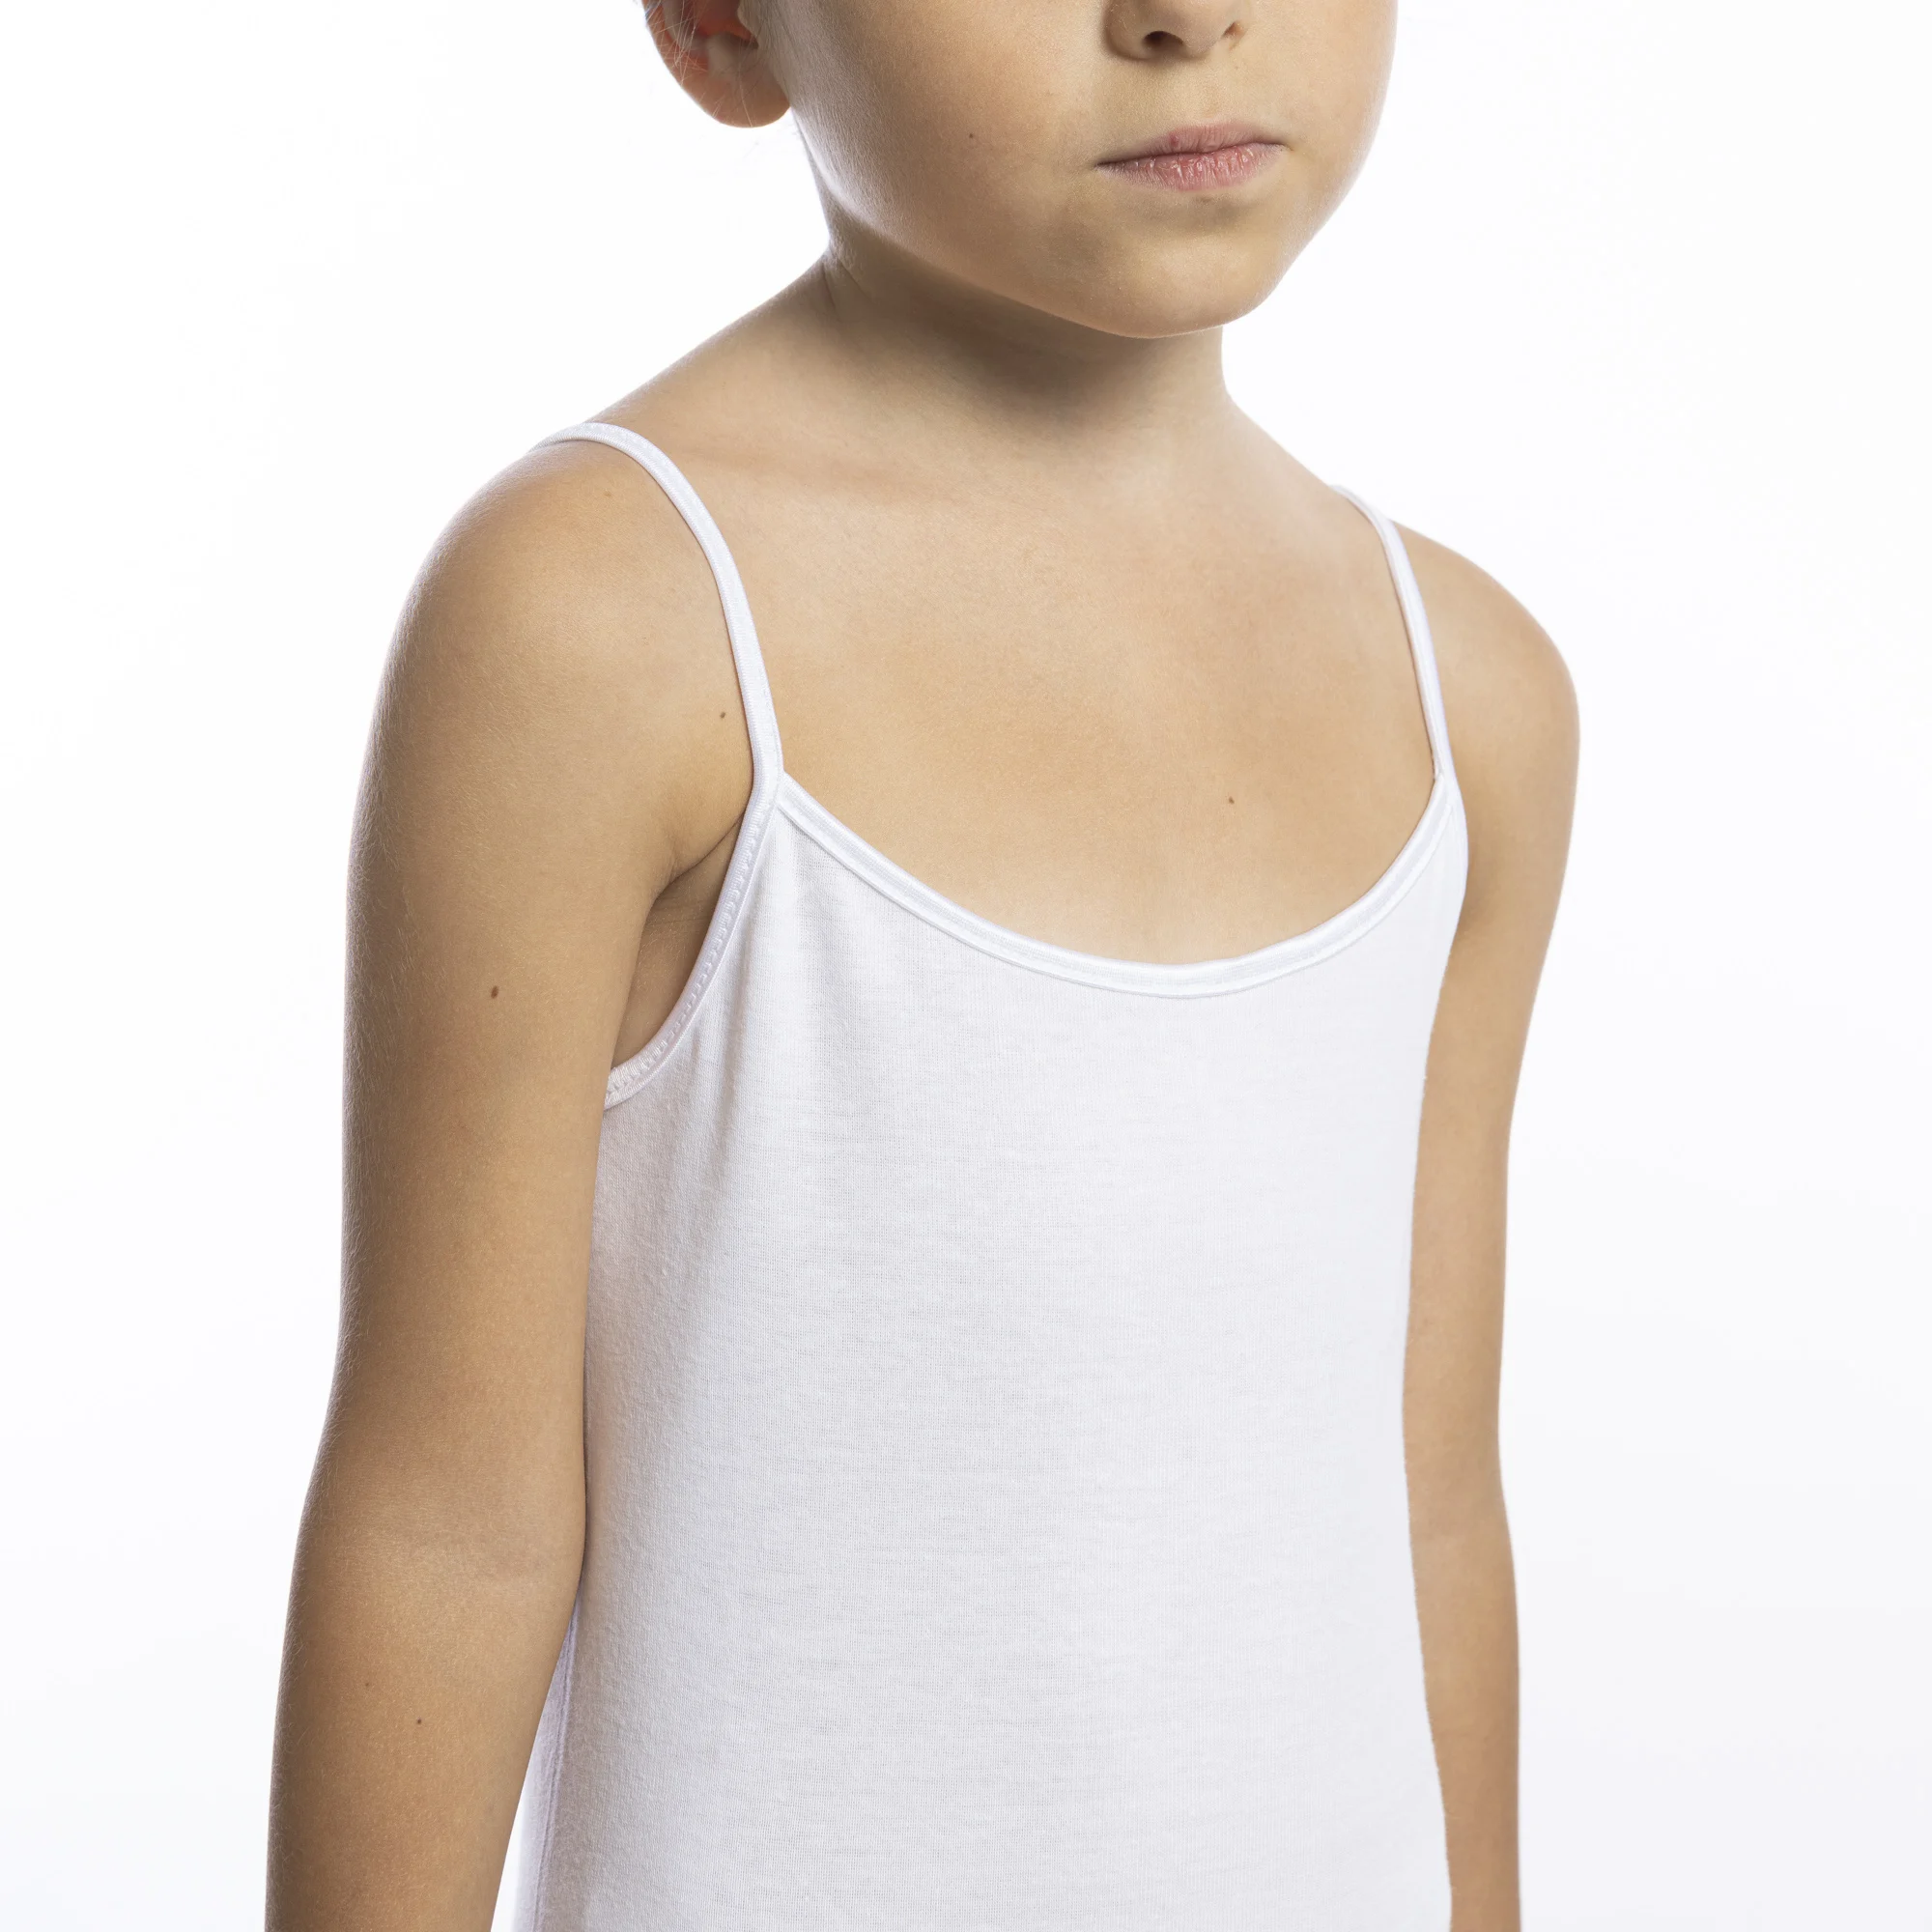 Made In Italy - Narrow Shoulders Girl's Undershirt Tank Top With Satin ...